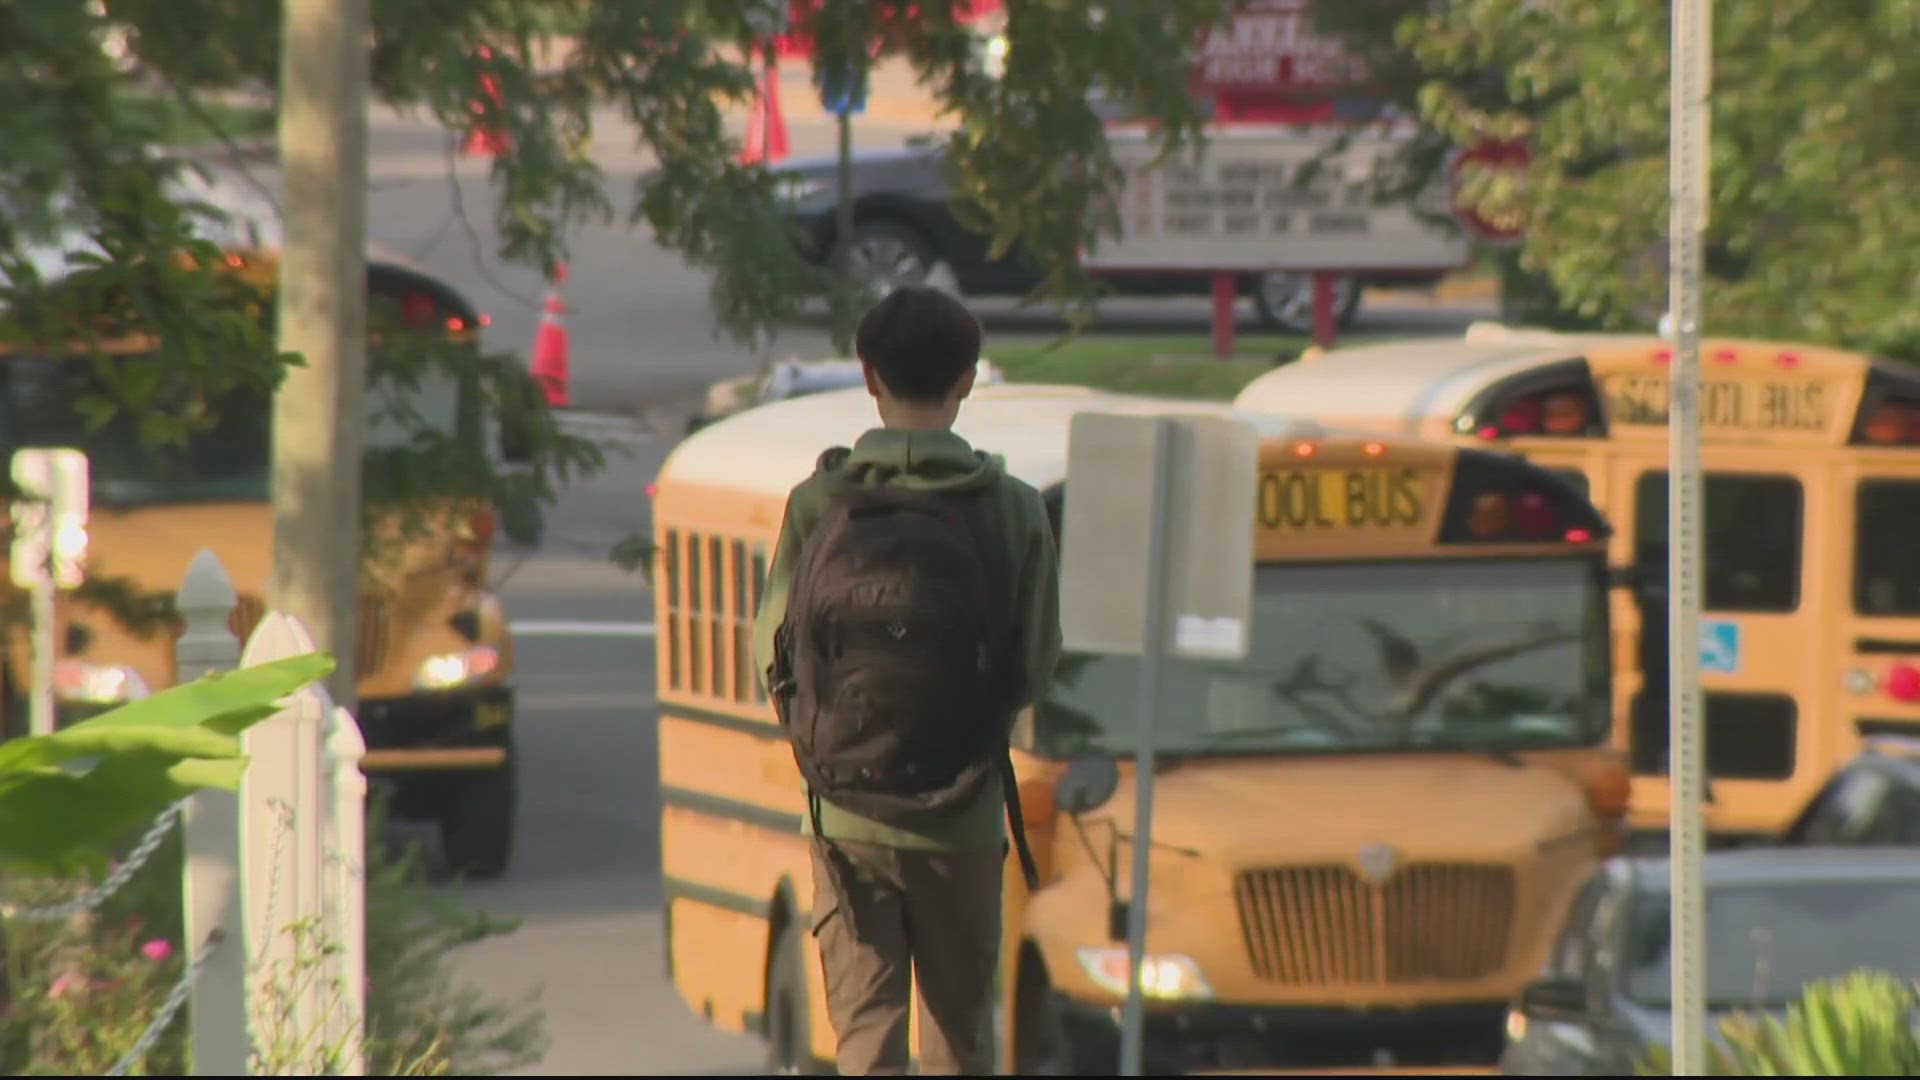 A school bus driver shortage DID impact bus routes today, but it's not the ONLY reason.